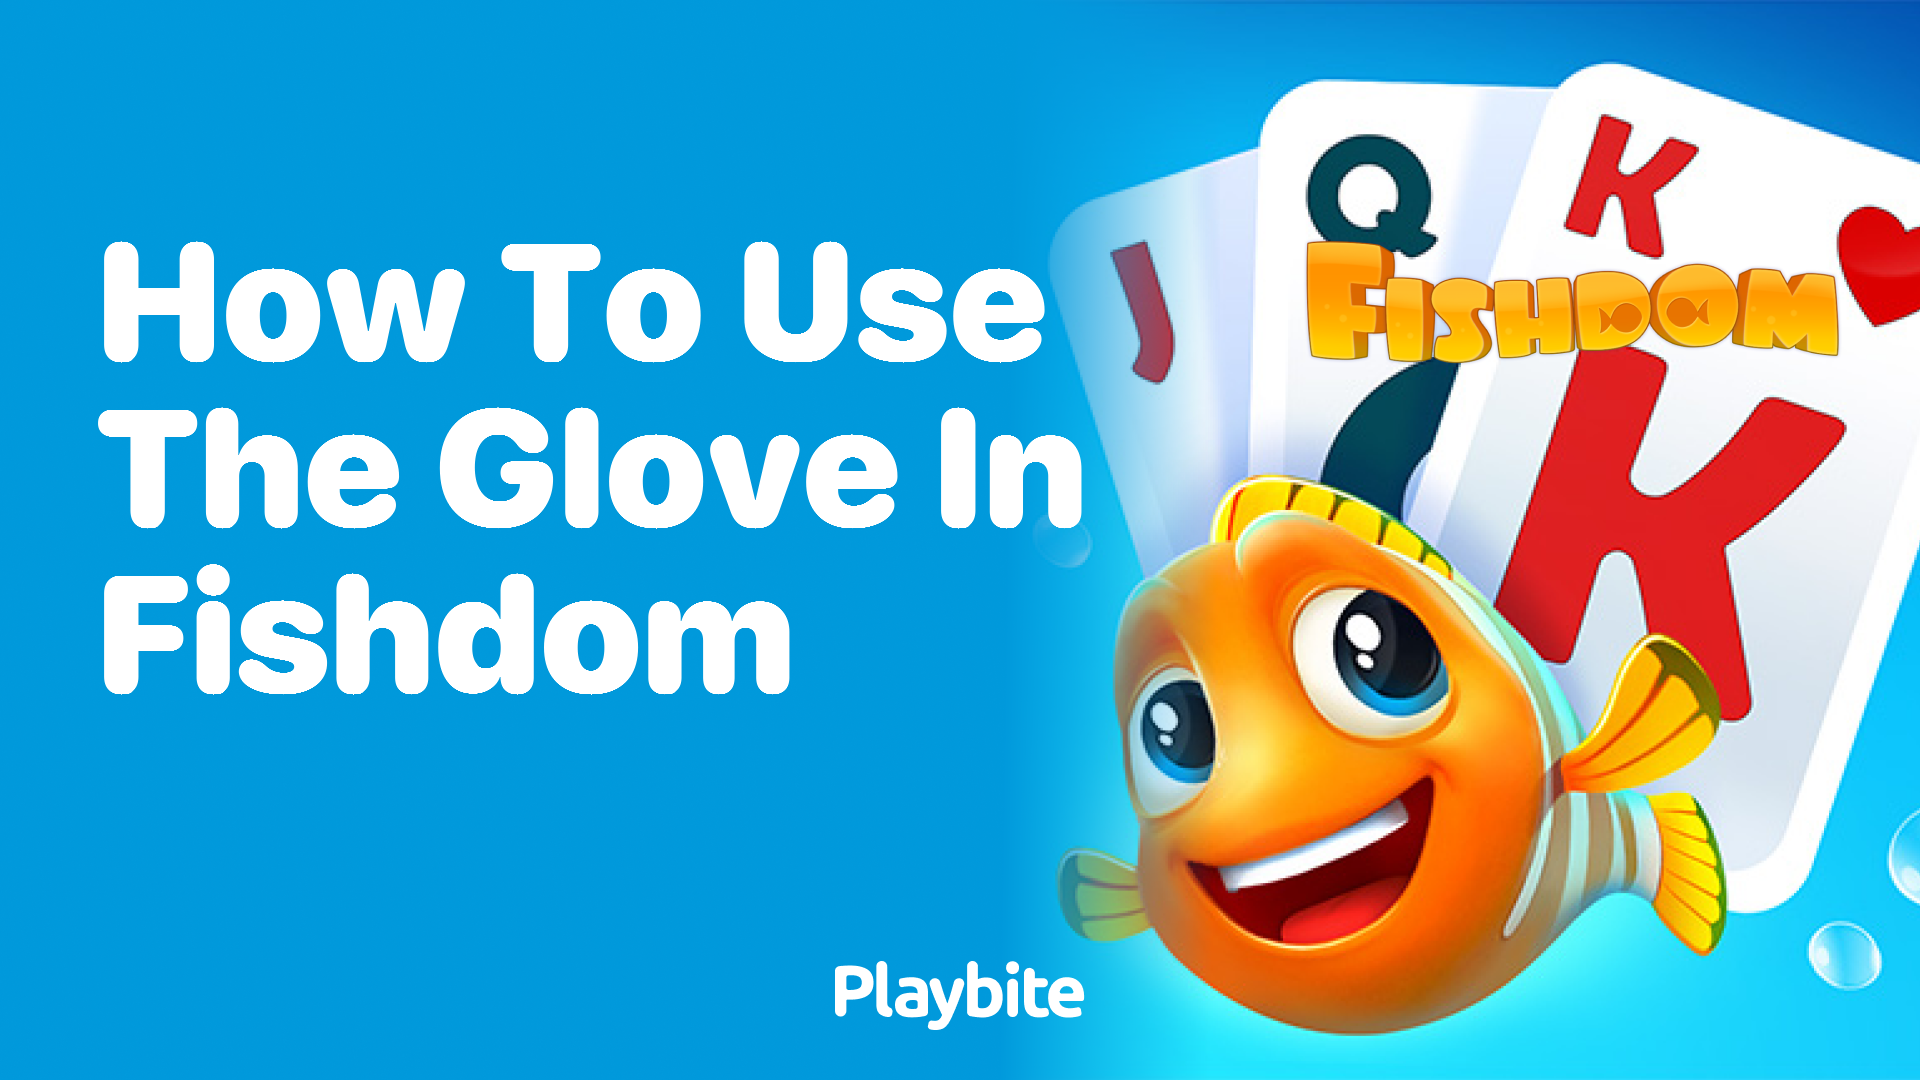 How to Use the Glove in Fishdom: A Quick Guide